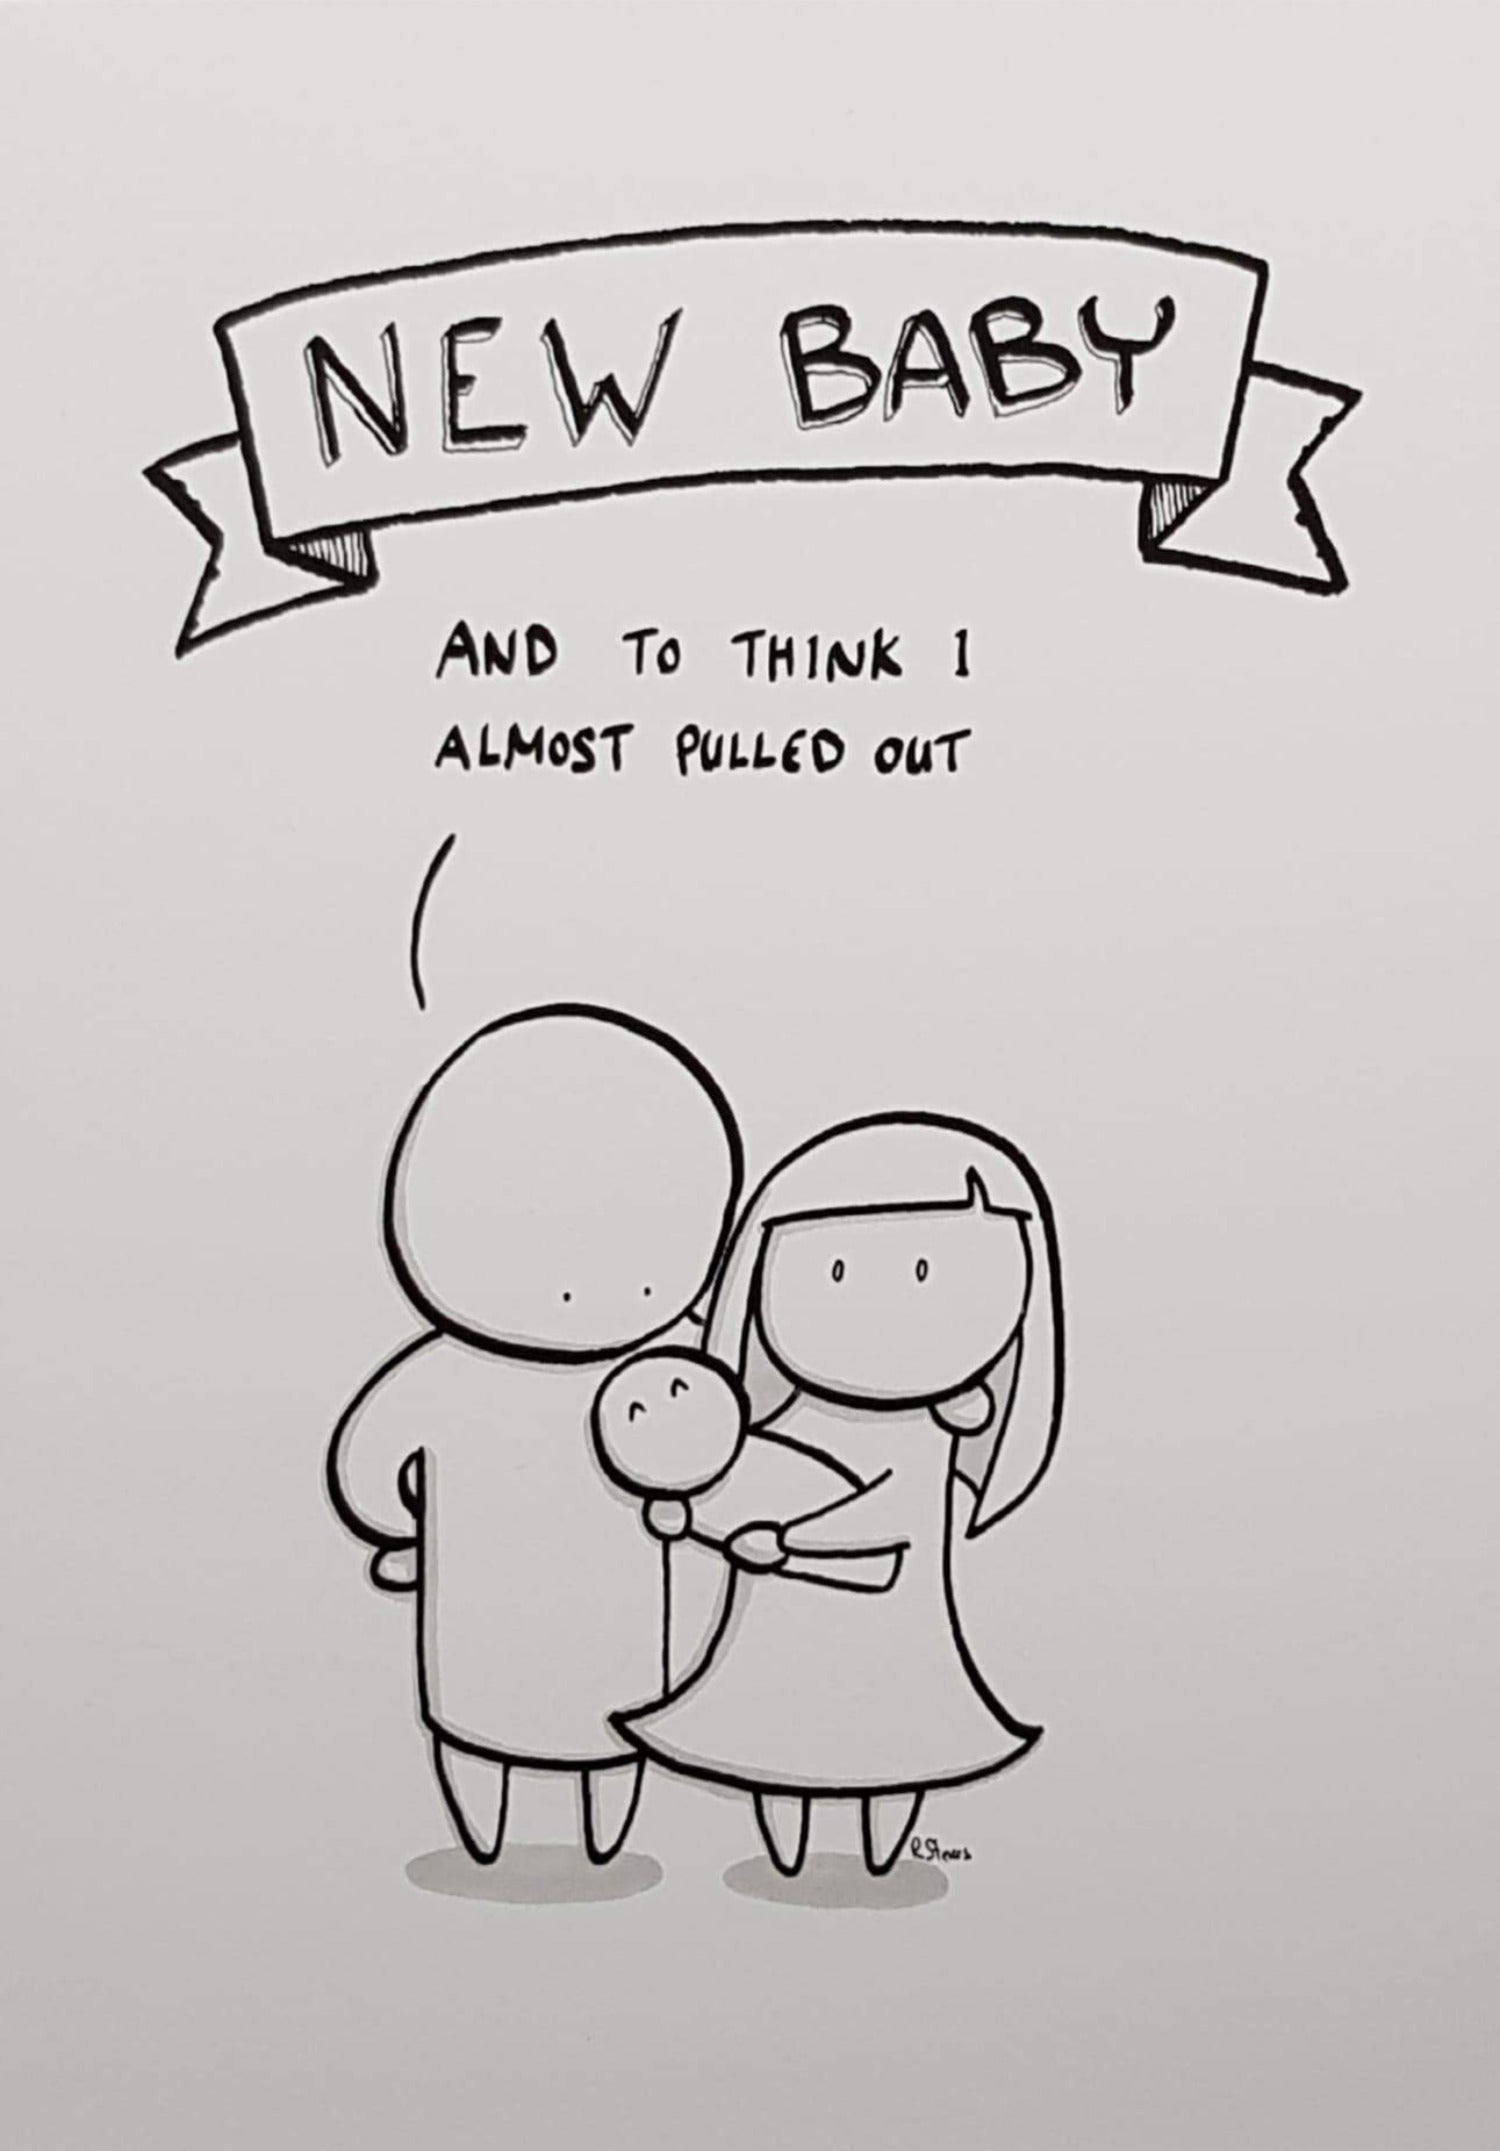 New Baby Card - General / 'And To Think I Almost Pulled Out' (Humour)